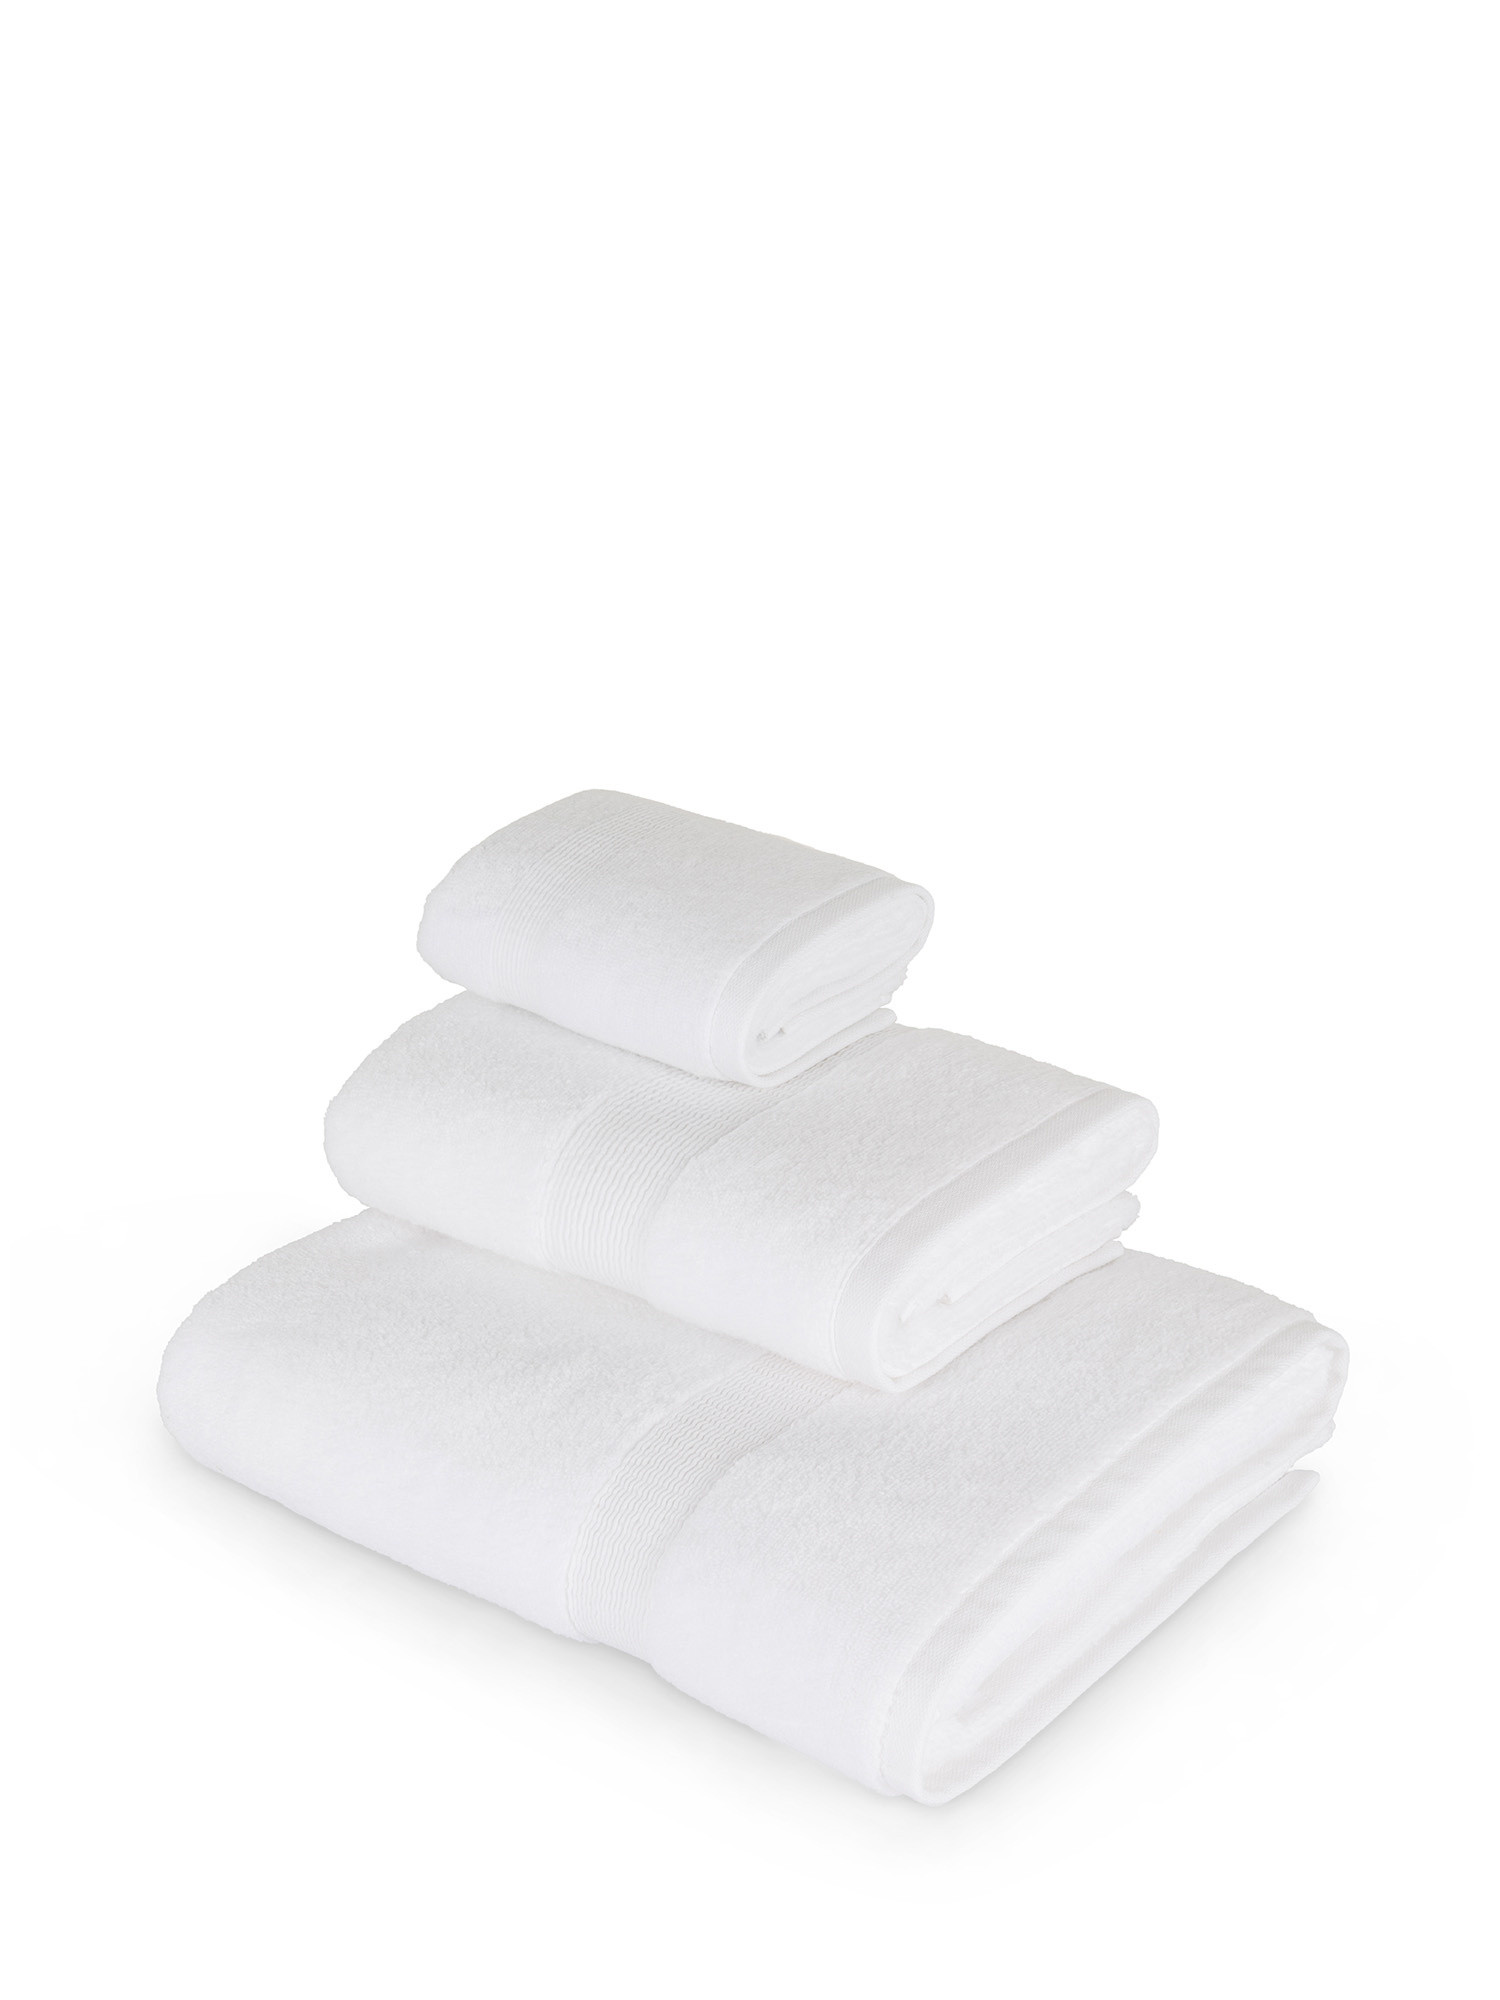 Ultra soft solid color pure cotton terry towel, White, large image number 0